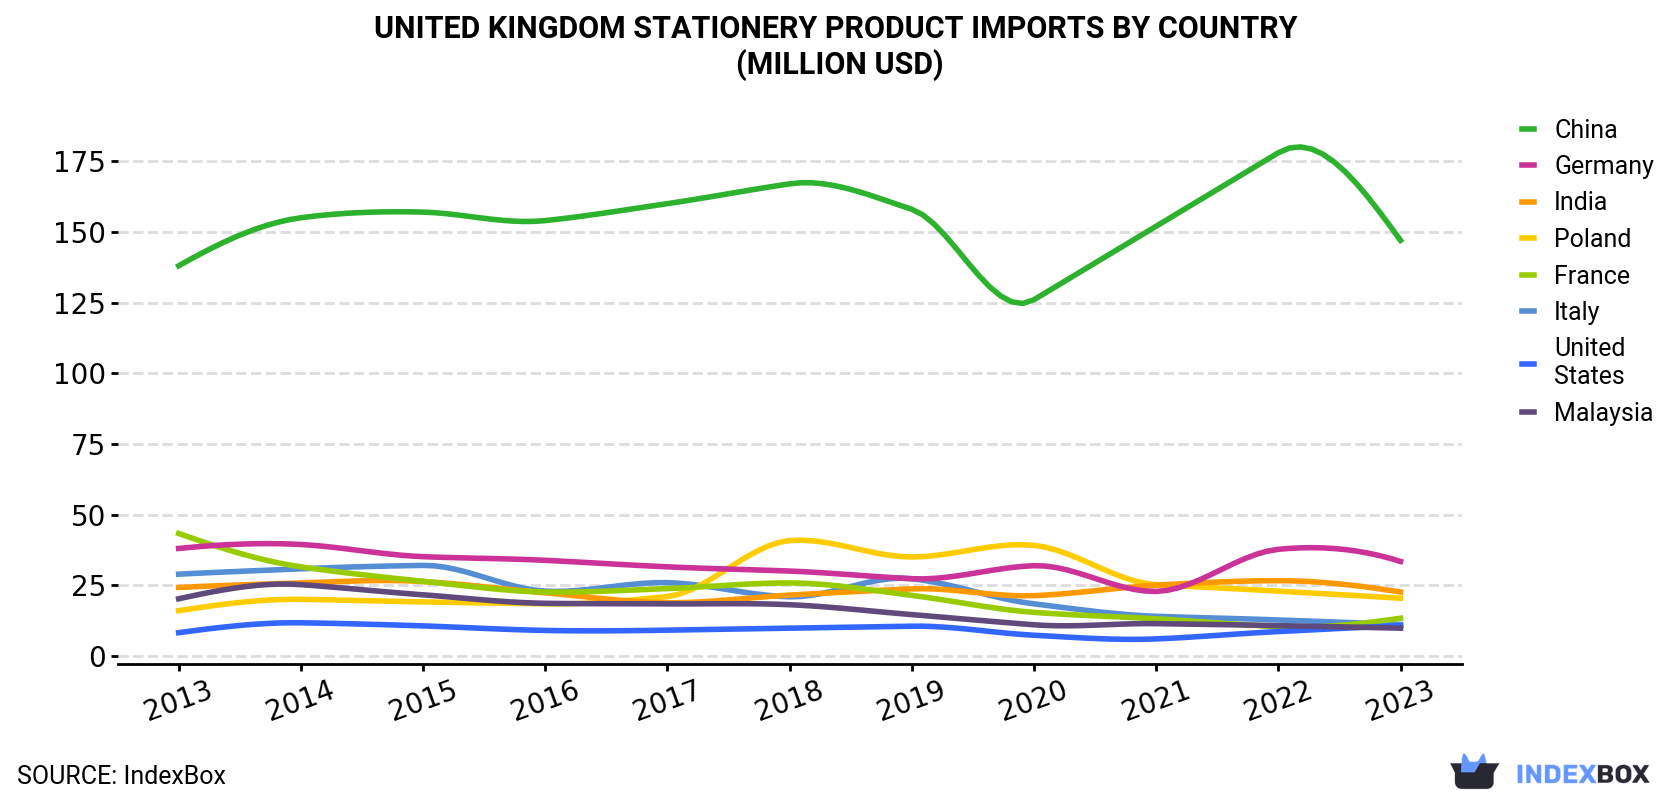 United Kingdom Stationery Product Imports By Country (Million USD)